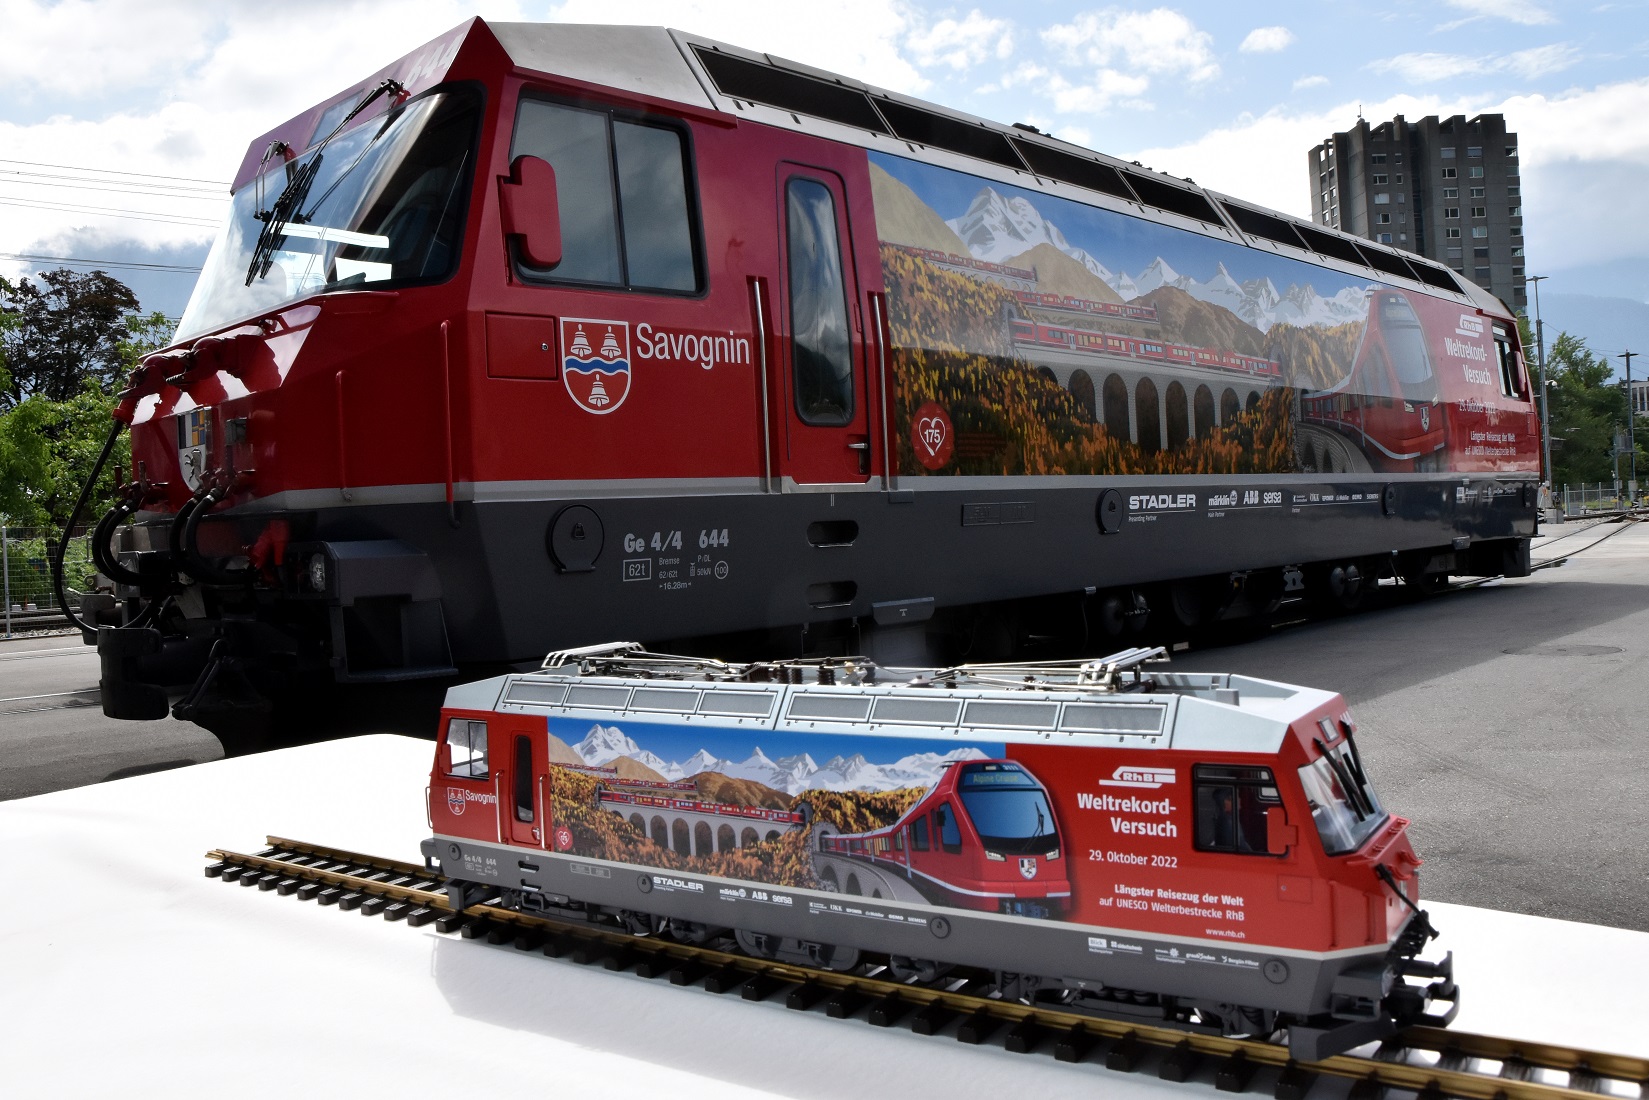 The scene is Landquart depot on 29th June 2022 (exact four months before the record attempt) when both this Märklin model and the specially decorated Ge 4/4 locomotive 'Savognin' were launched simultaneously - behind is the real locomotive and in front is the scale model.